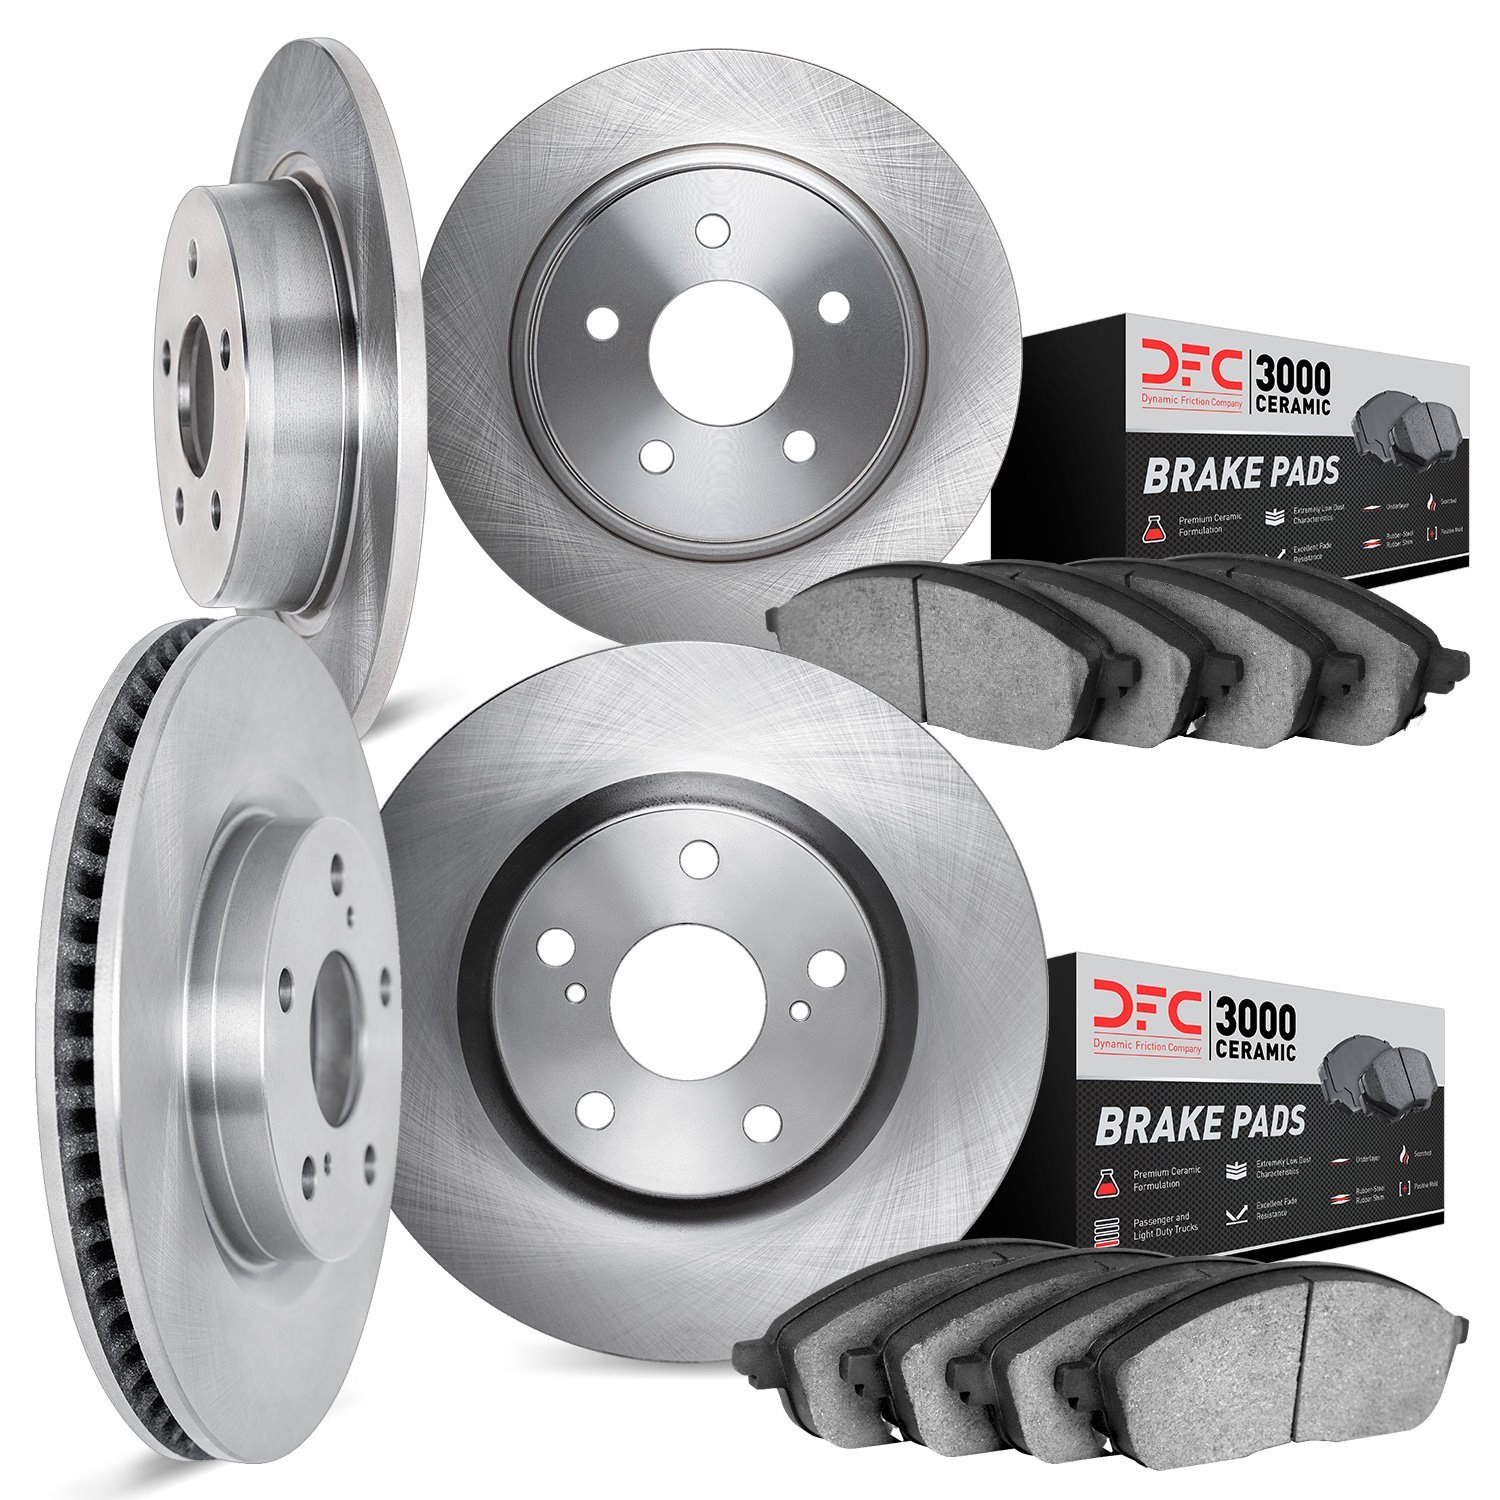 6304-74010 Brake Rotors with 3000-Series Ceramic Brake Pads Kit, Fits Select Audi/Volkswagen, Position: Front and Rear